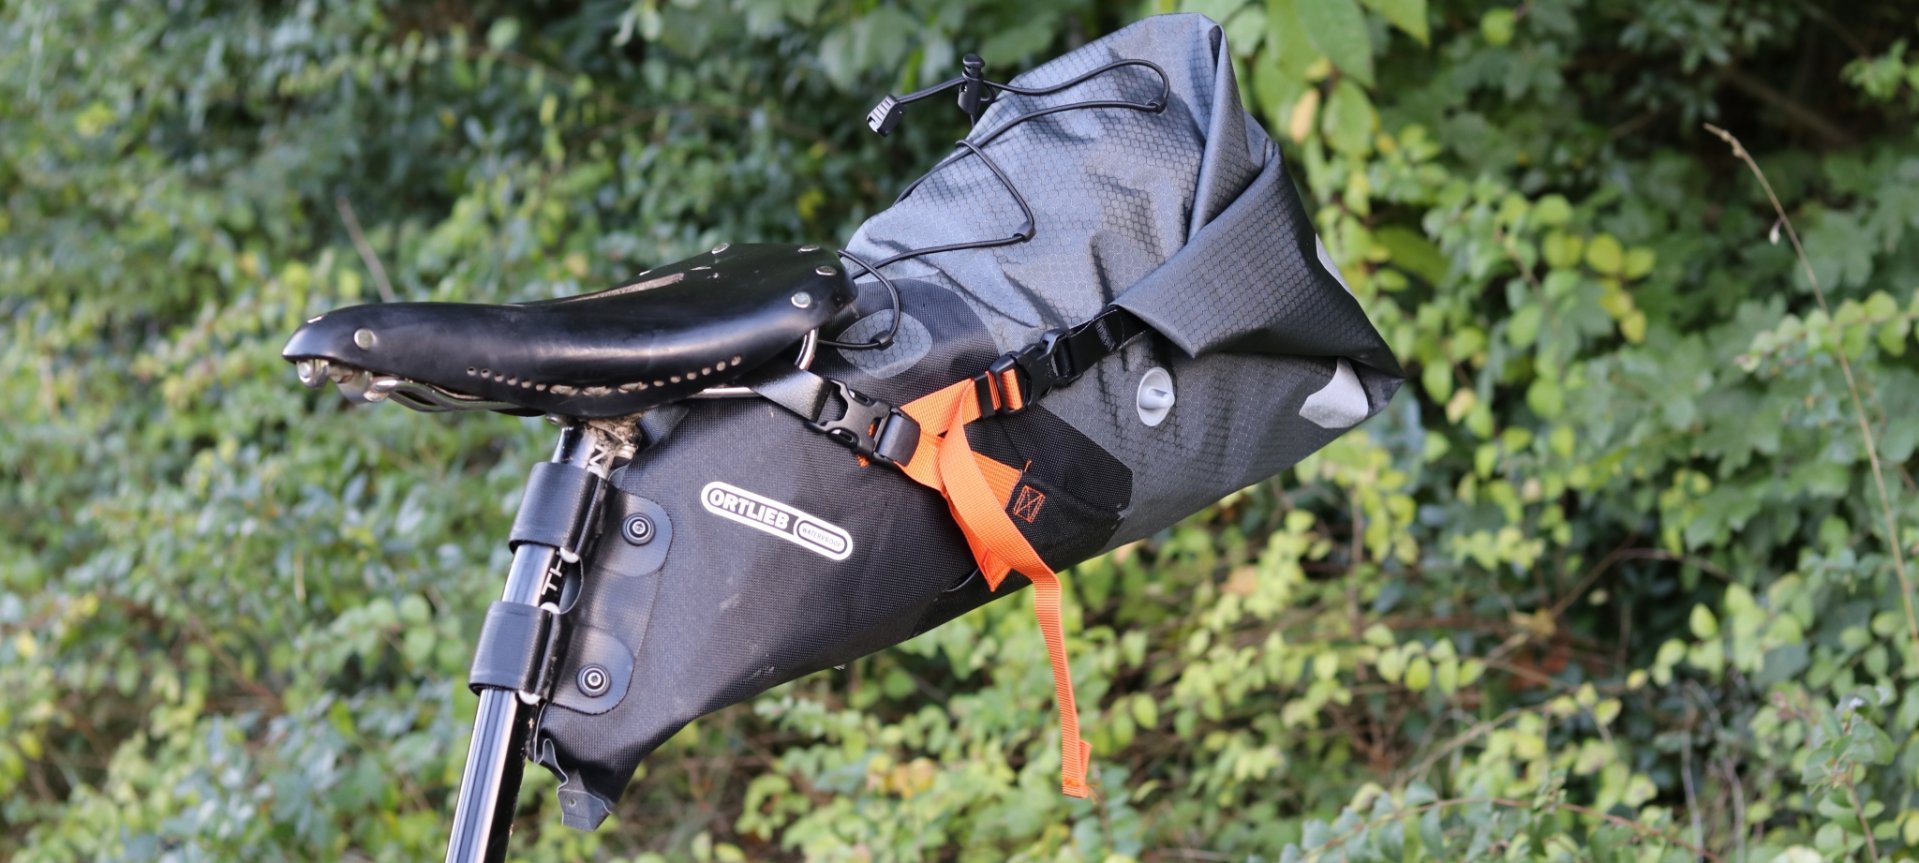 With 16.5 litres, the Seat-Pack is a great place to store clothing and other lightweight gear.